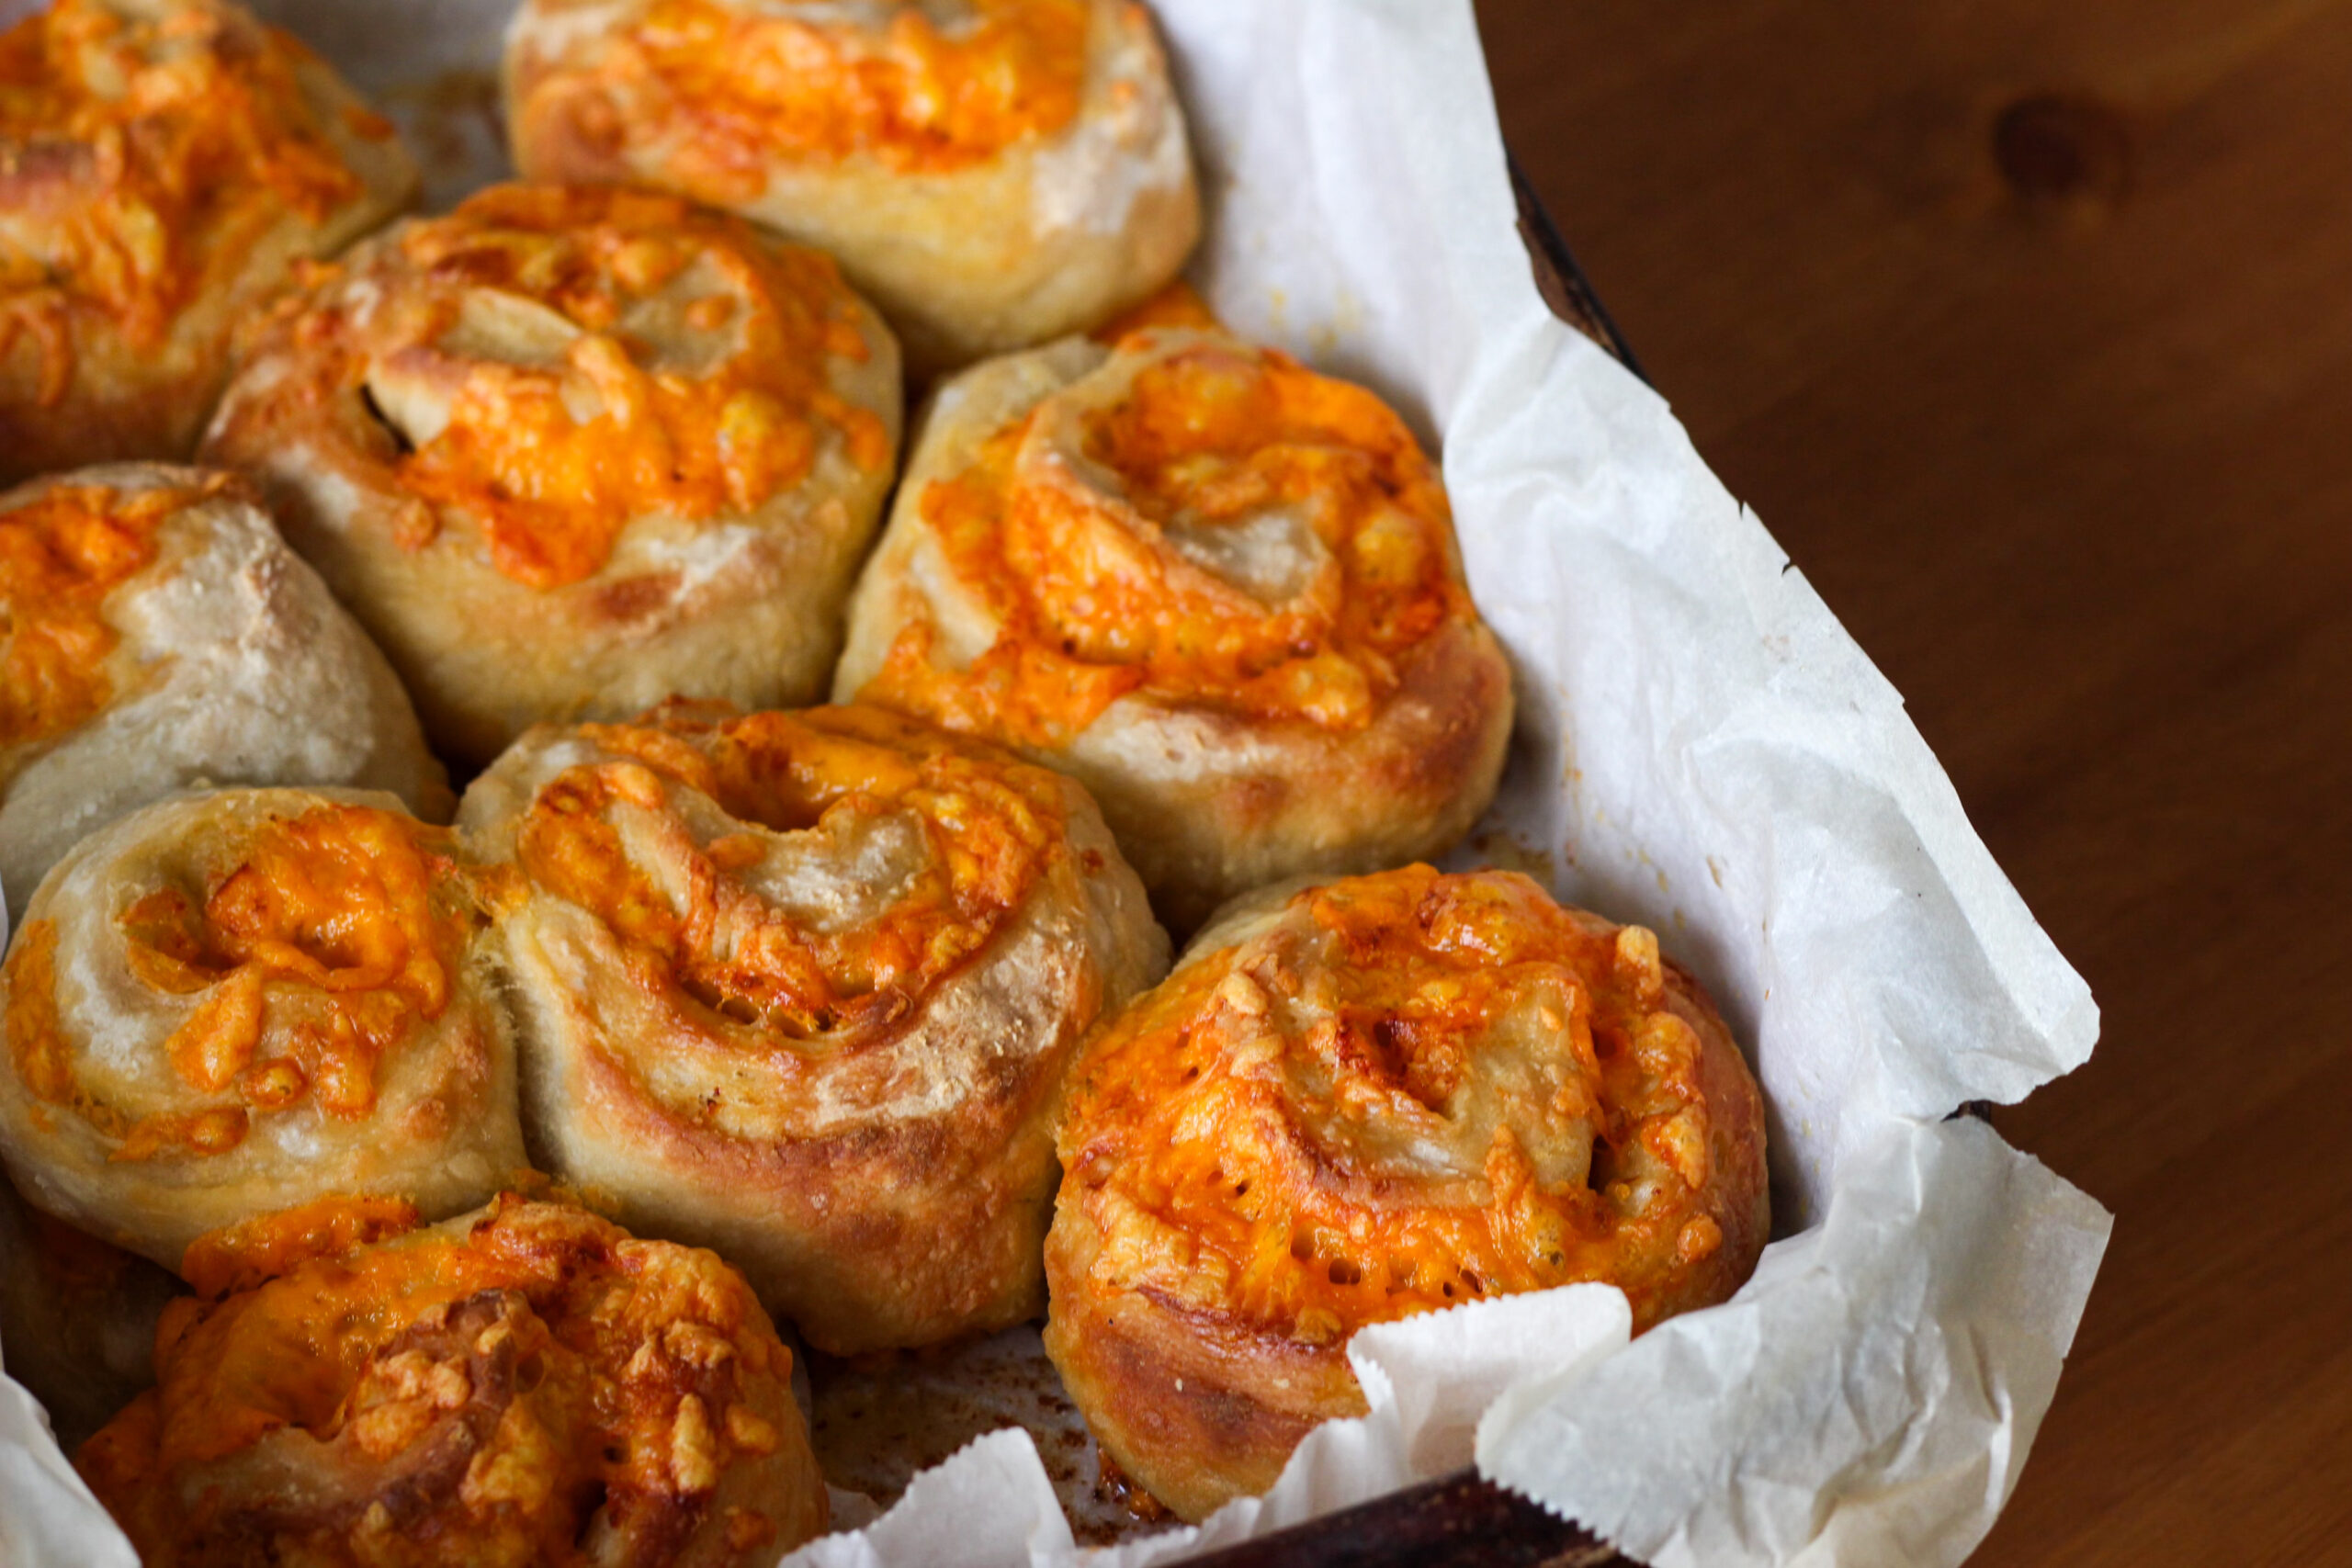 Freshly baked cheese-topped rolls in a baking dish.